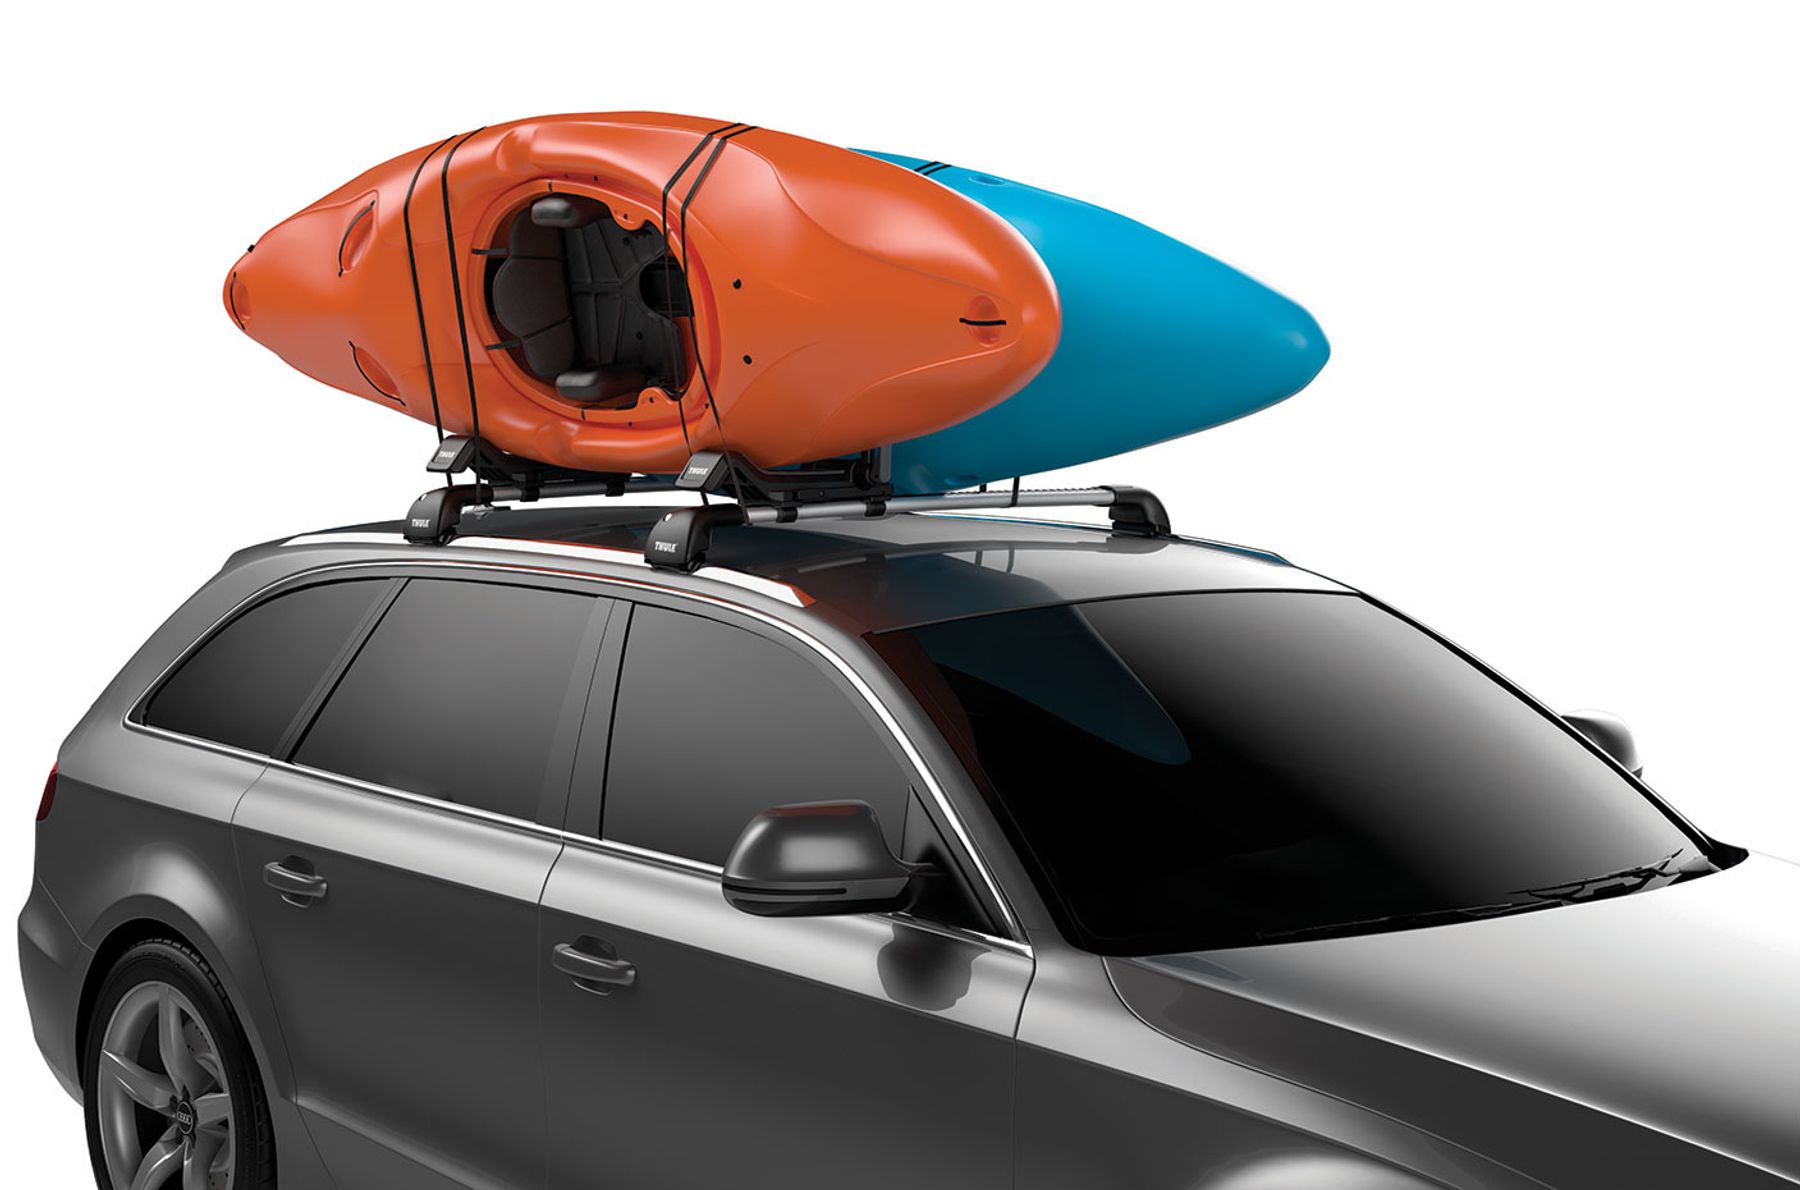 Thule Hull-a-Port XT on car and two kayaks on top